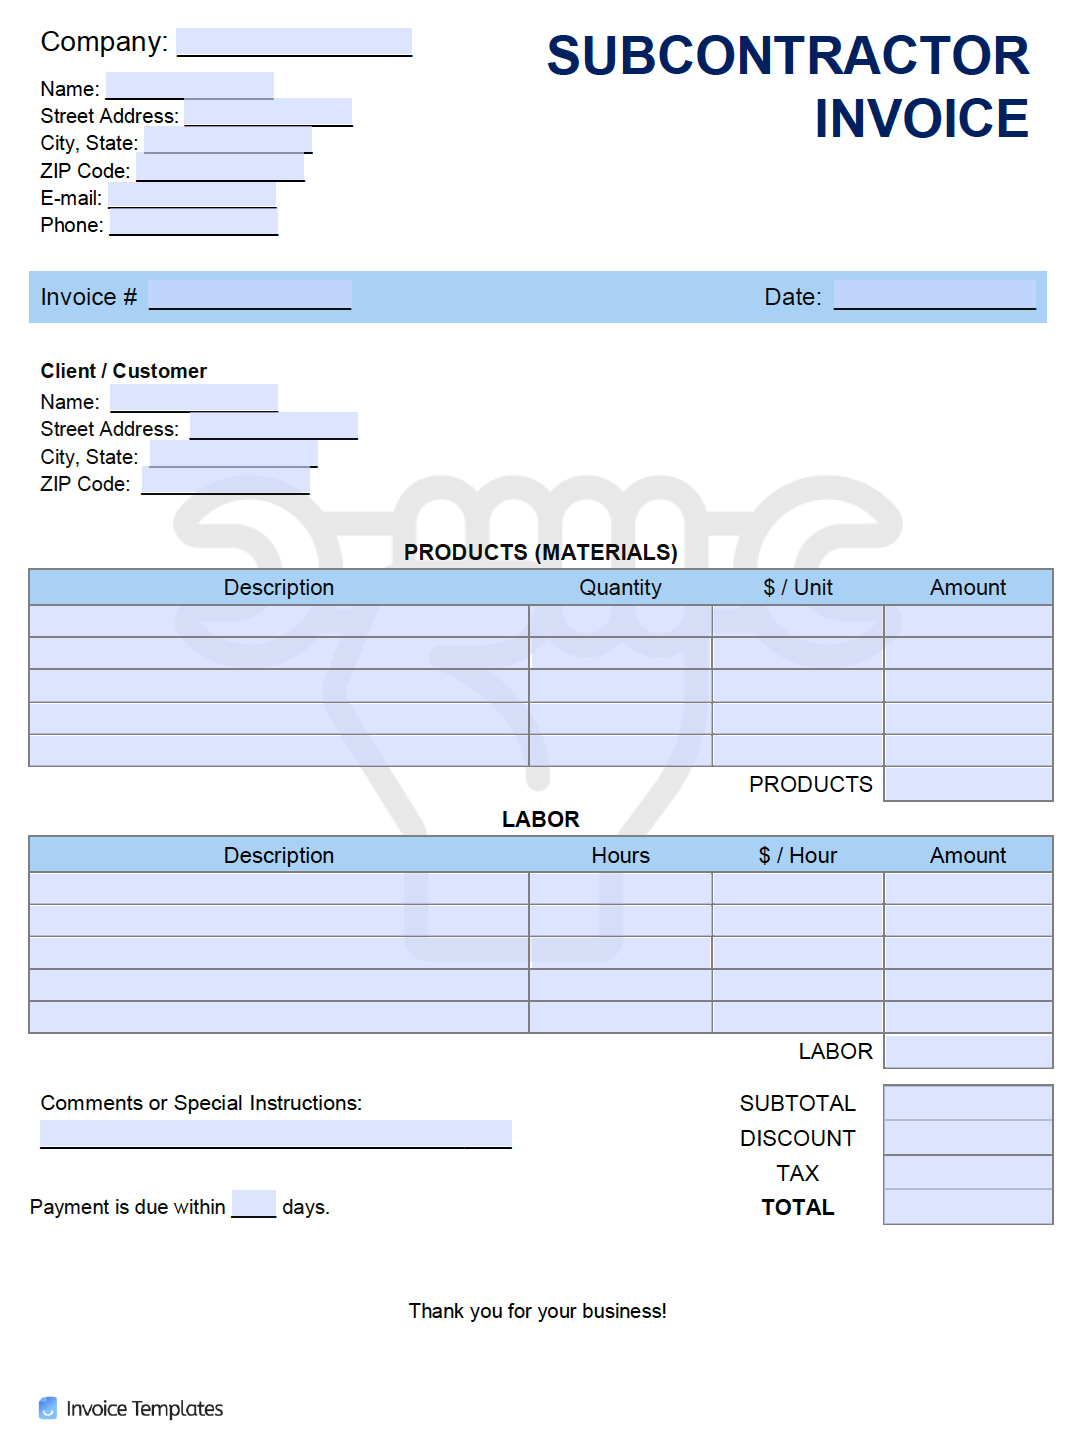 Free Subcontractor Invoice Template Pdf Word Excel